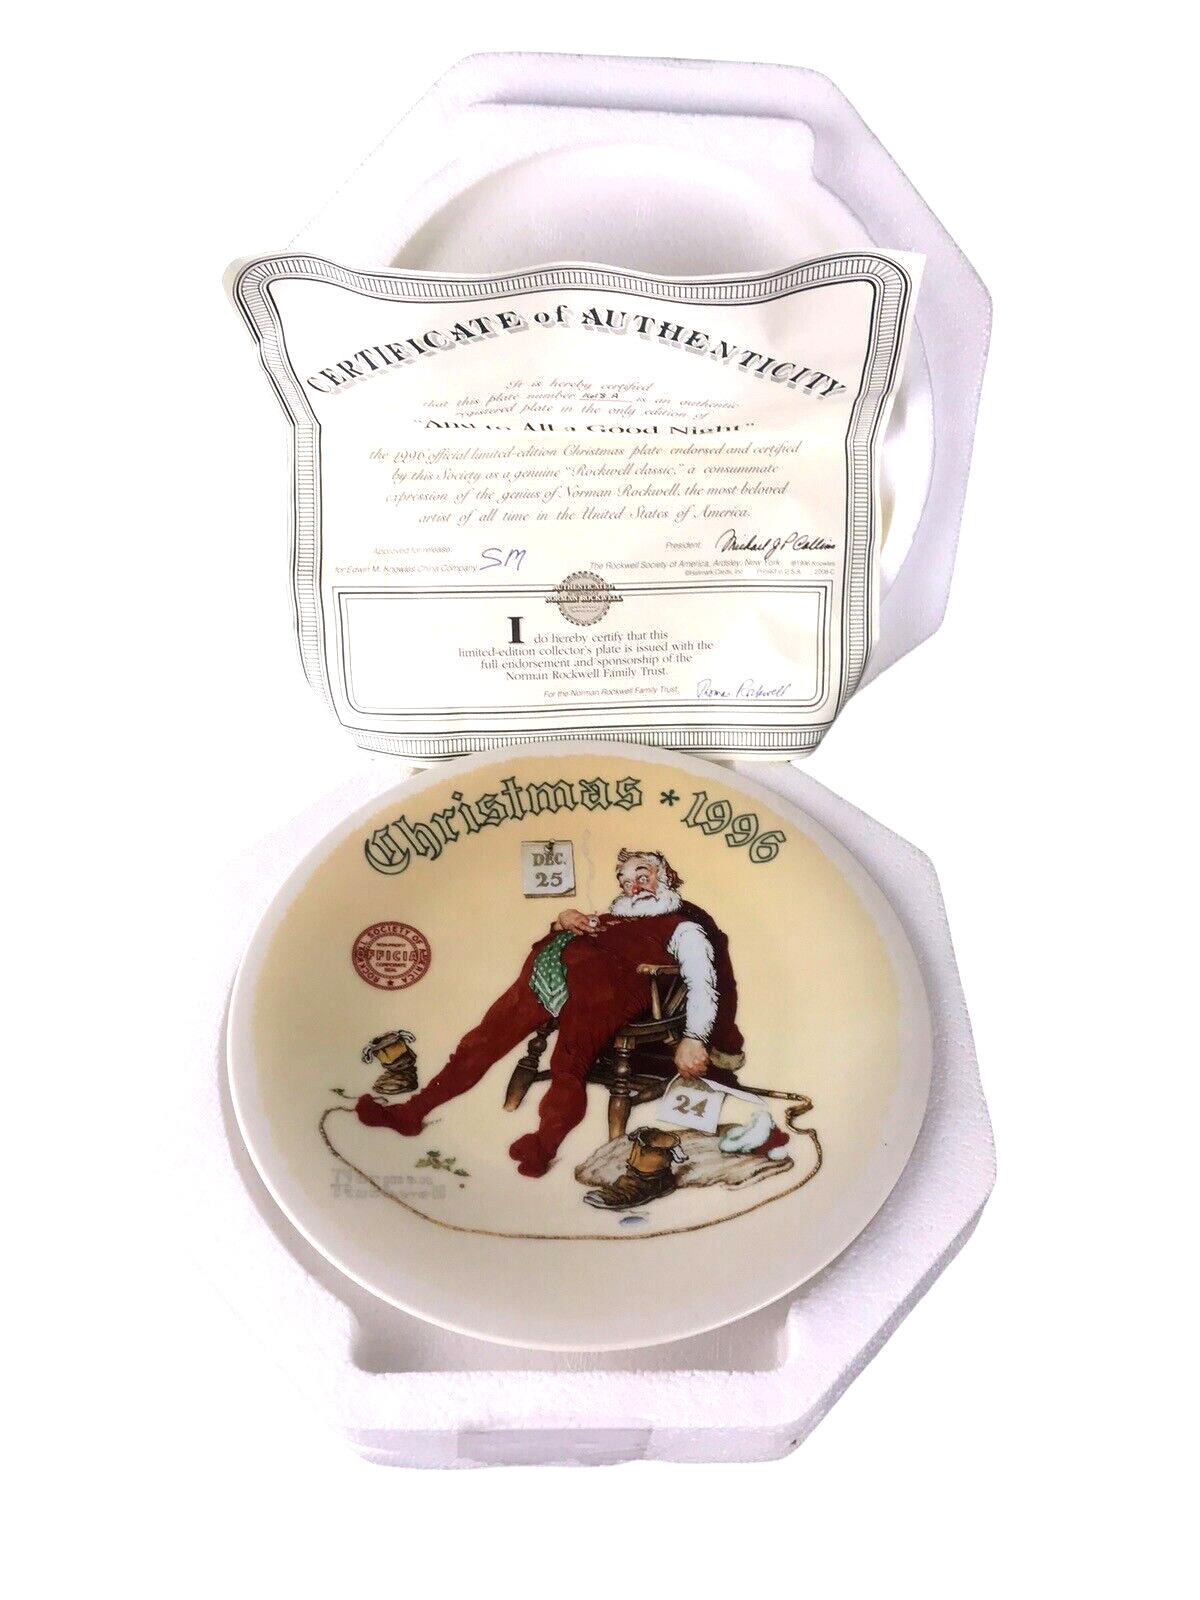 Knowles Norman Rockwell 1996 Christmas Plate AND TO ALL A GOOD NIGHT MIB COA